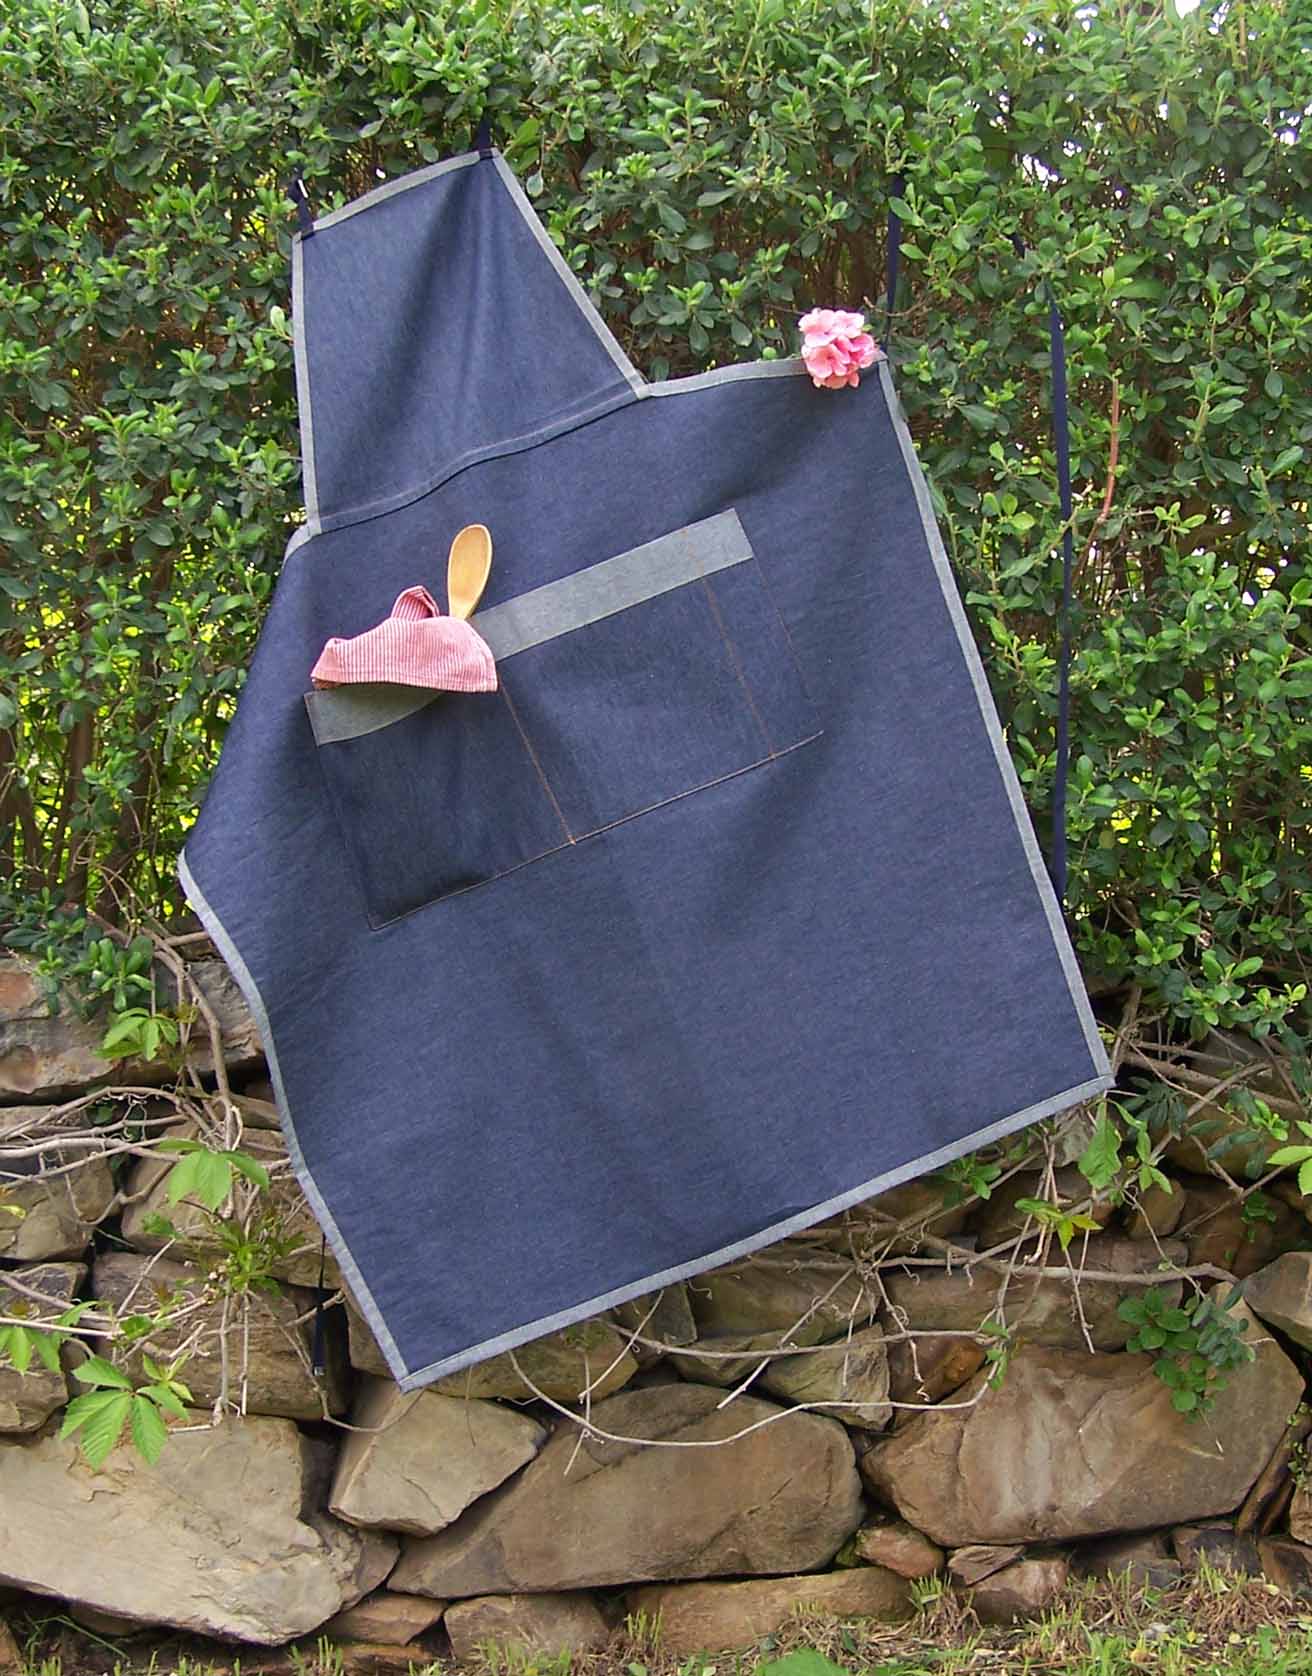 Roadworks Apron, Navy Cotton Drill. 6 Available Now. No More Will Be Coming Before Christmas. ~Carol❤️